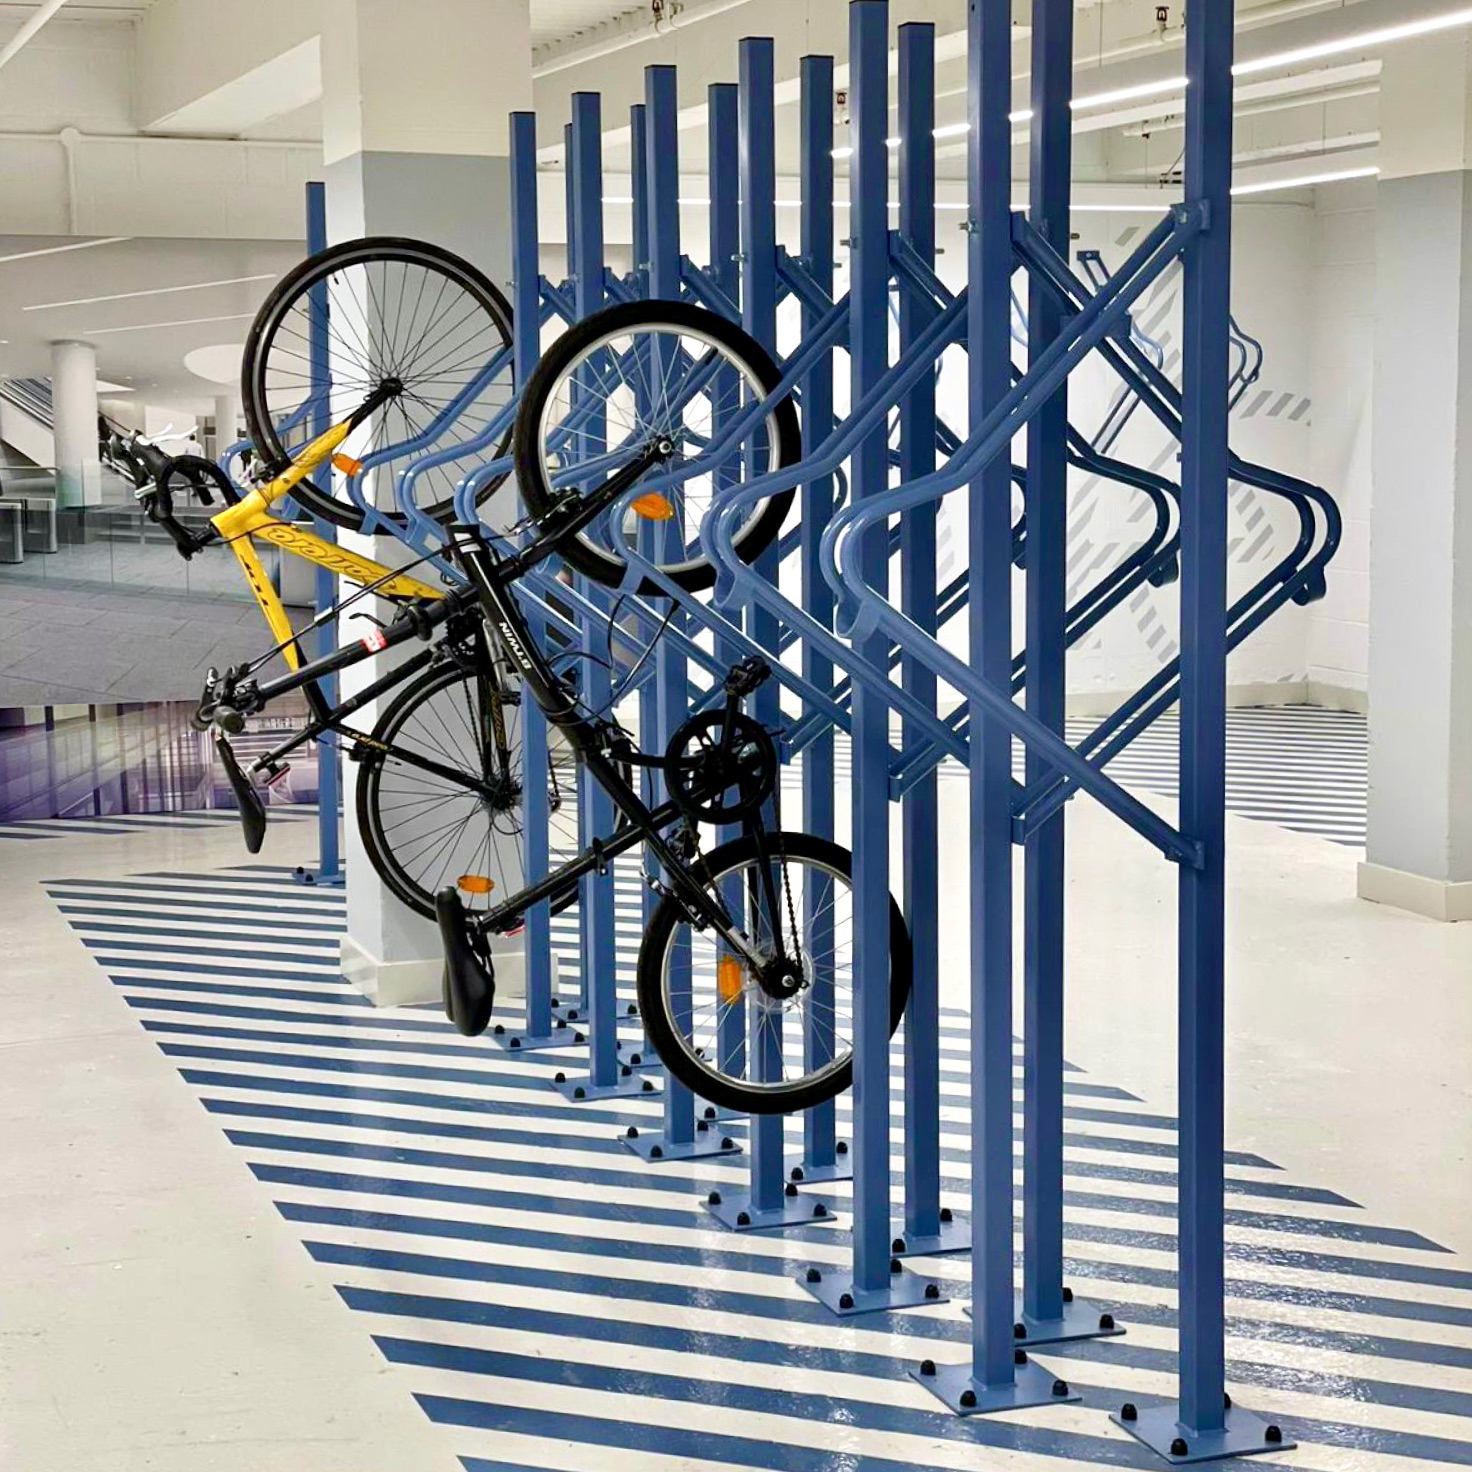 bikes on premium solo vertical bike racks in a commercial building